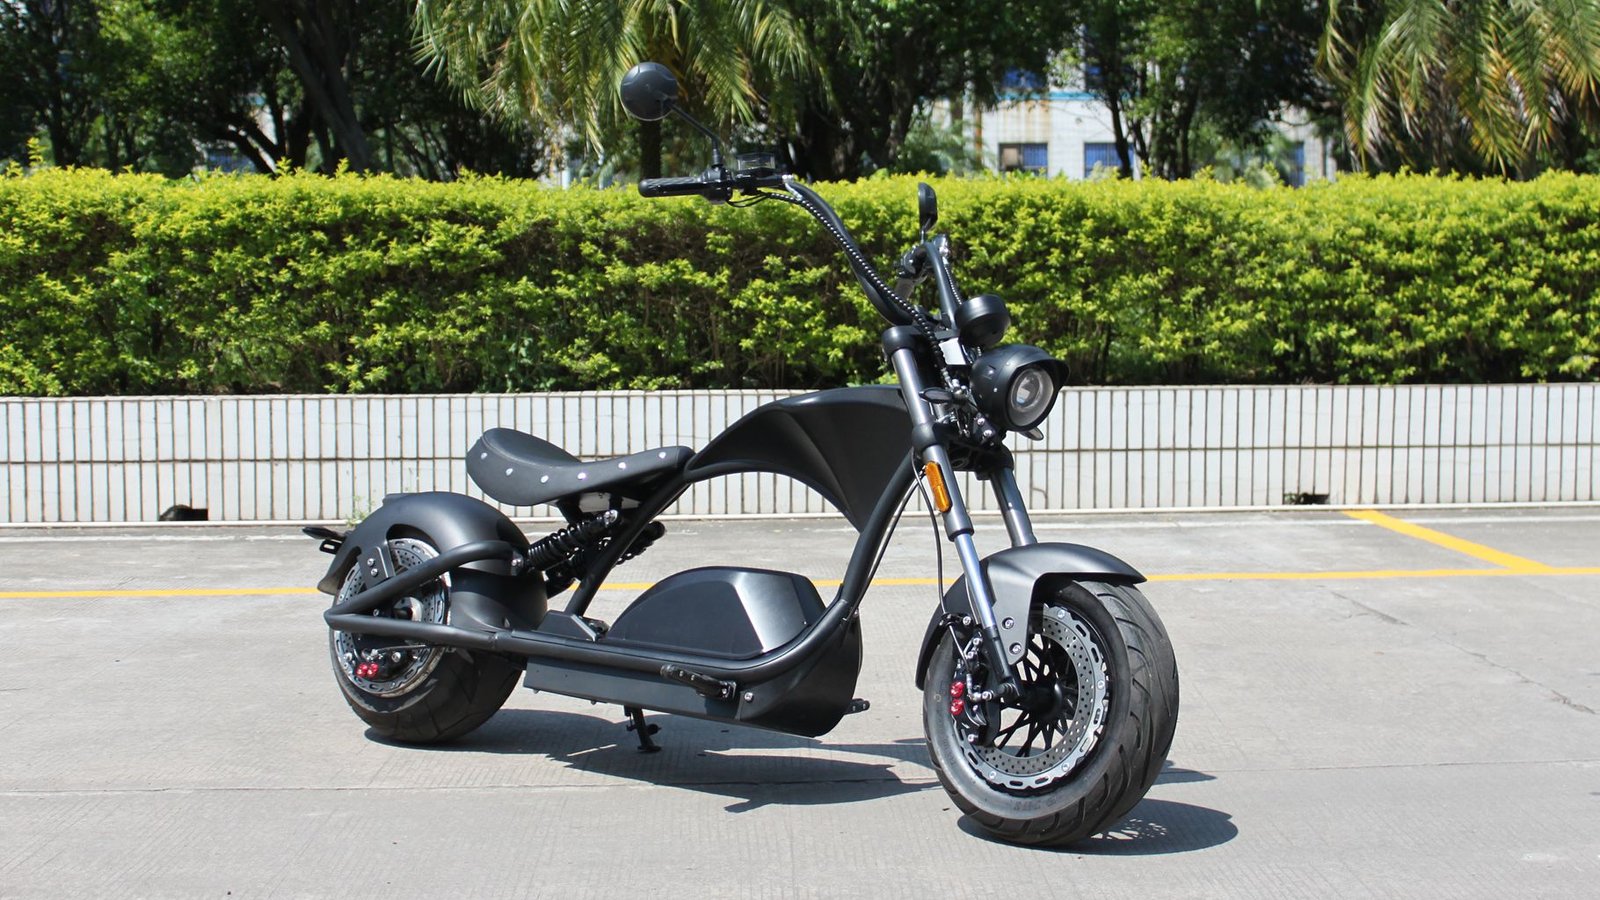 Rooder Mangosteen Sara M1ps 72v 4000w citycoco chopper electric motorcycle scooter (11)